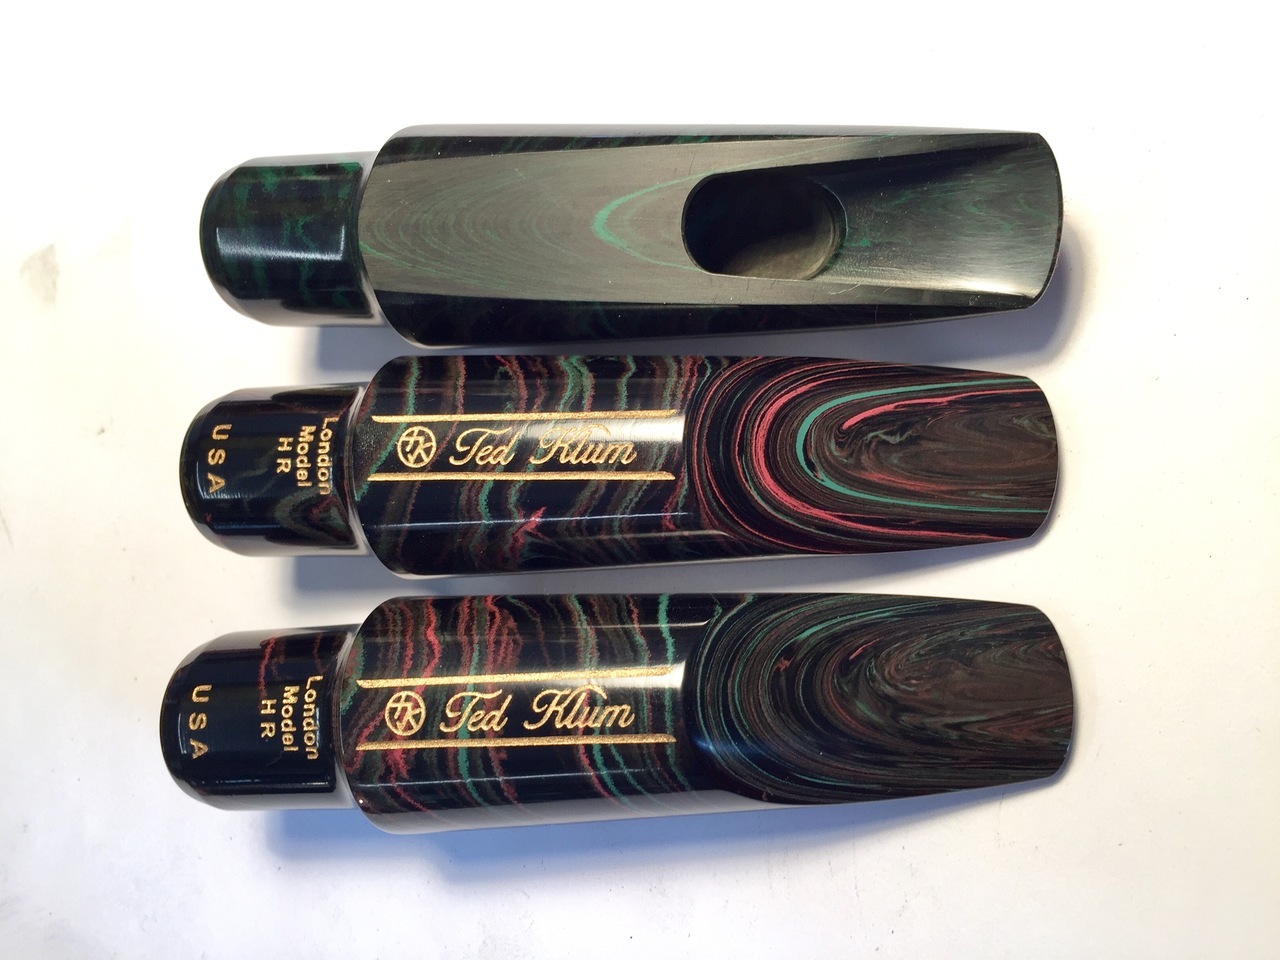 New London Model HR (Tenor) | Ted Klum Mouthpieces